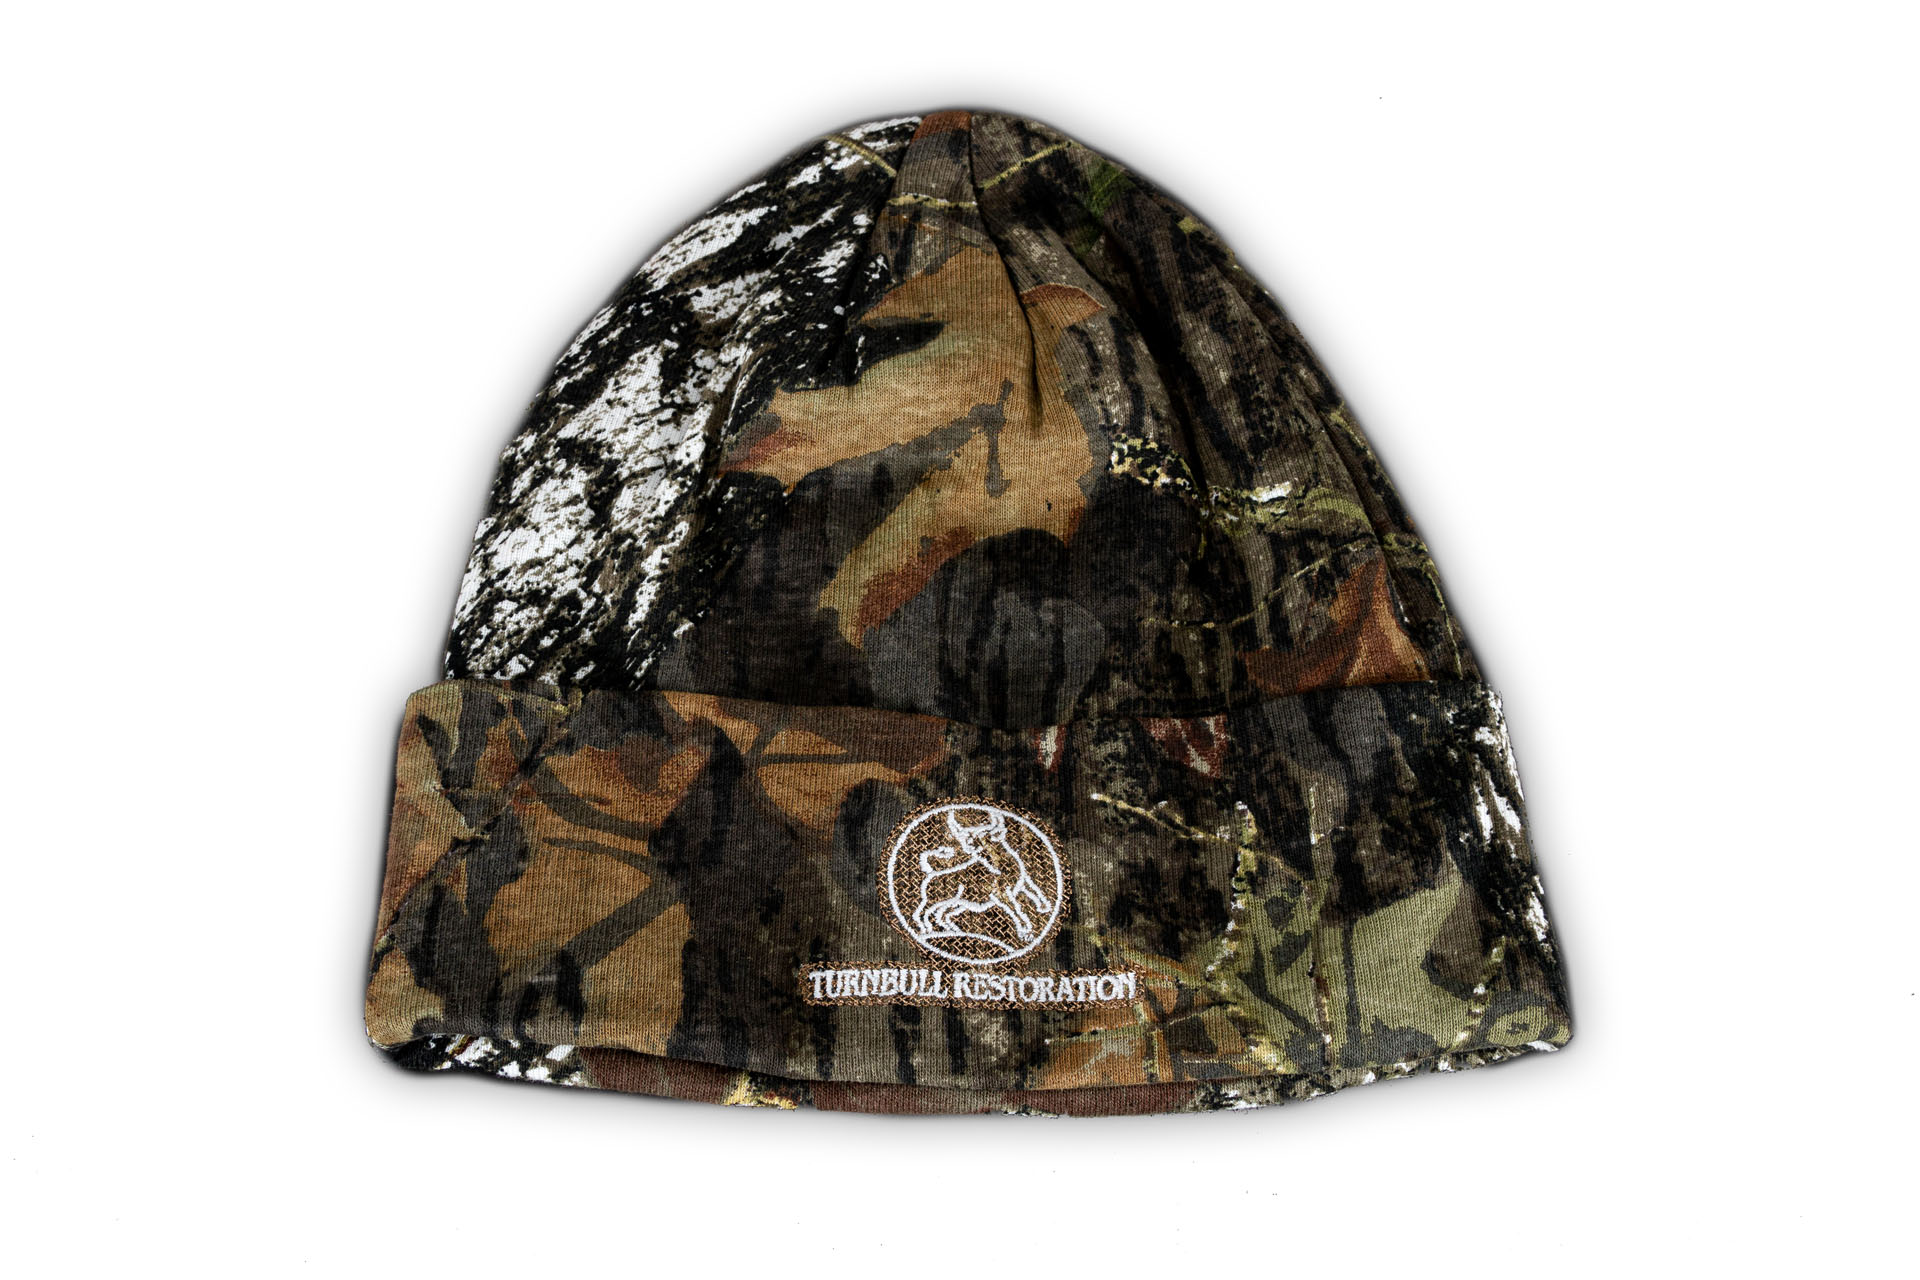 Photo of a Turnbull Restoration knit hat, printed in Mossy Oak Break-Up Country camo pattern